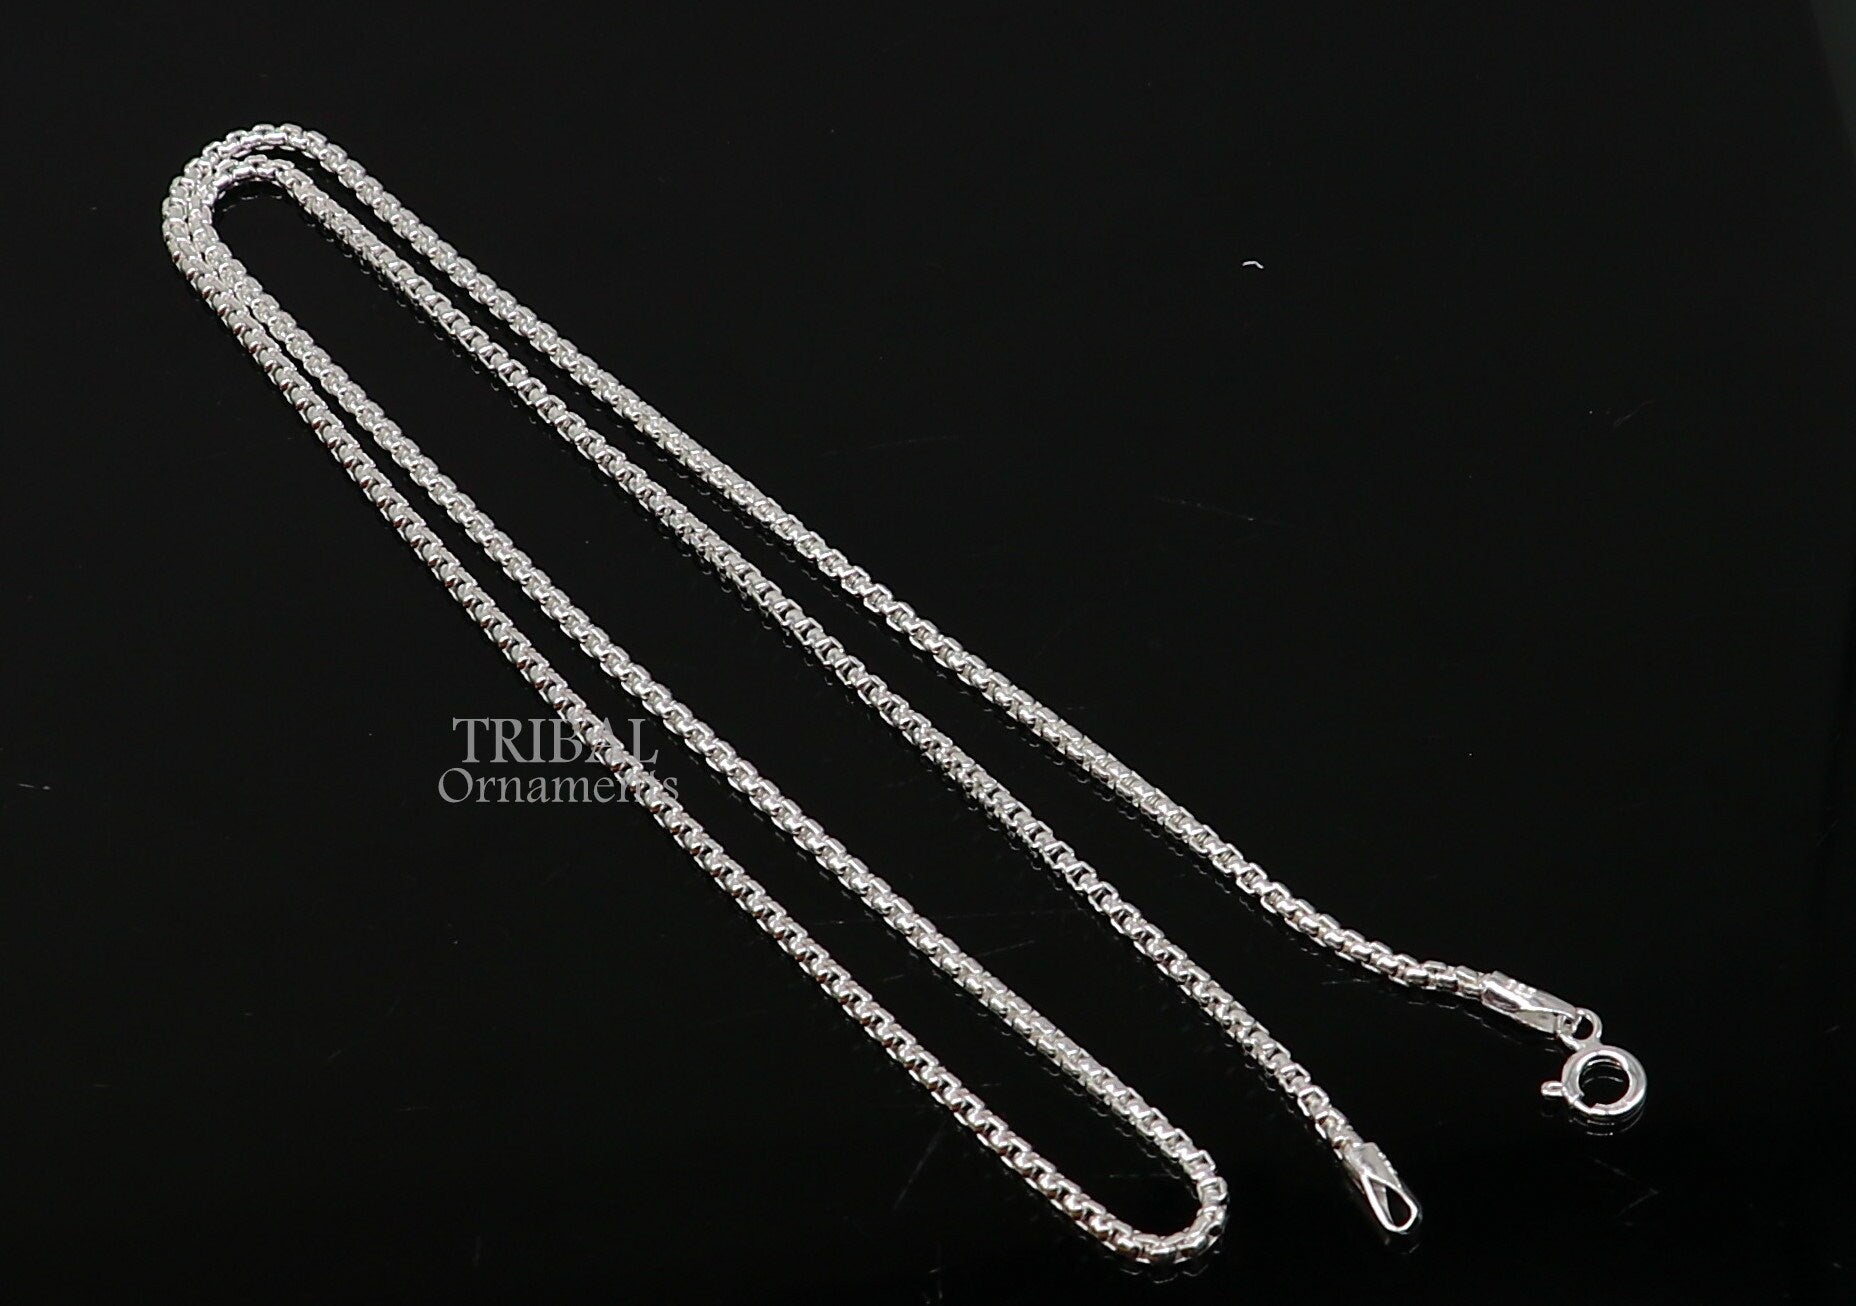 2mm 925 sterling silver handmade amazing stylish delicate solid Rolo high quality chains necklace, best gifting unisex necklace chain ch224 - TRIBAL ORNAMENTS